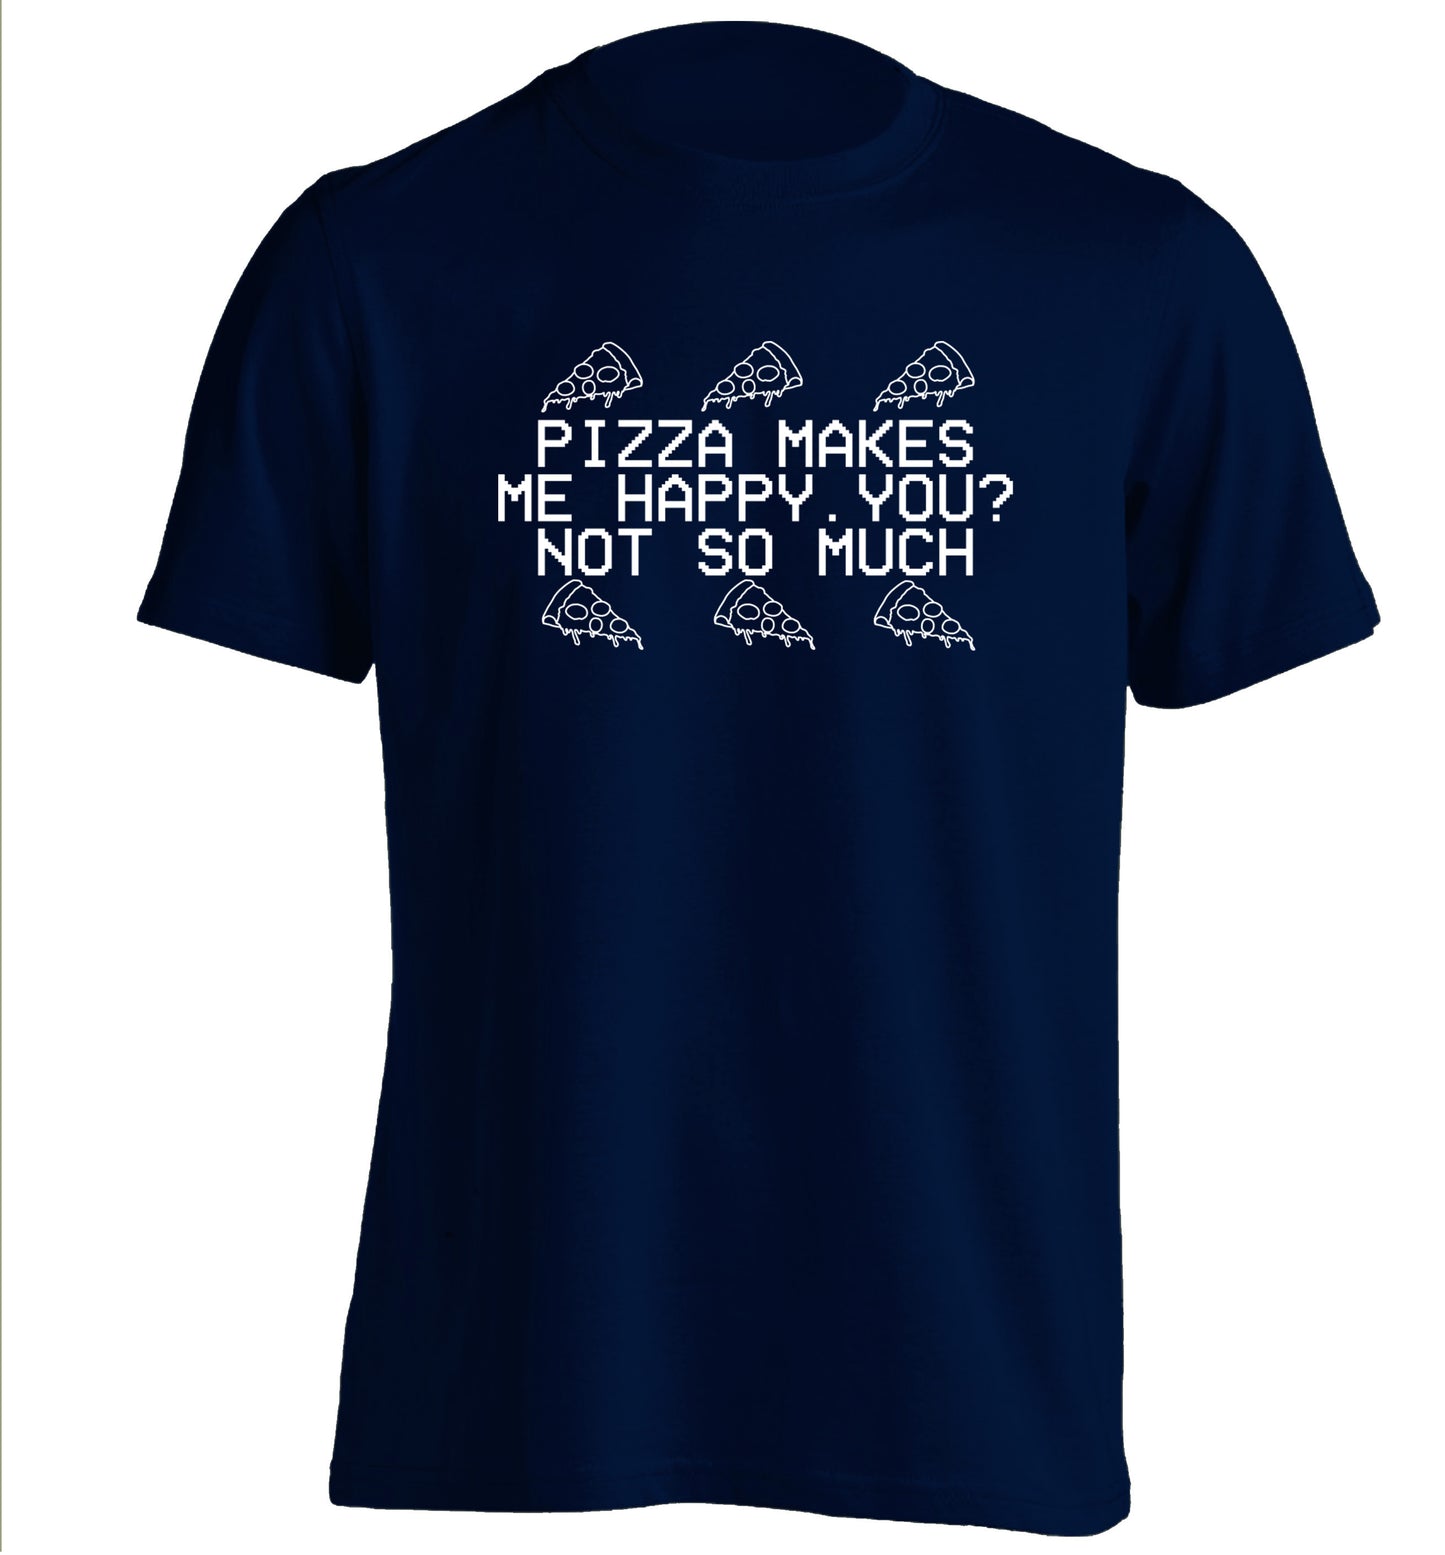 Pizza makes me happy, You? Not so much adults unisex navy Tshirt 2XL